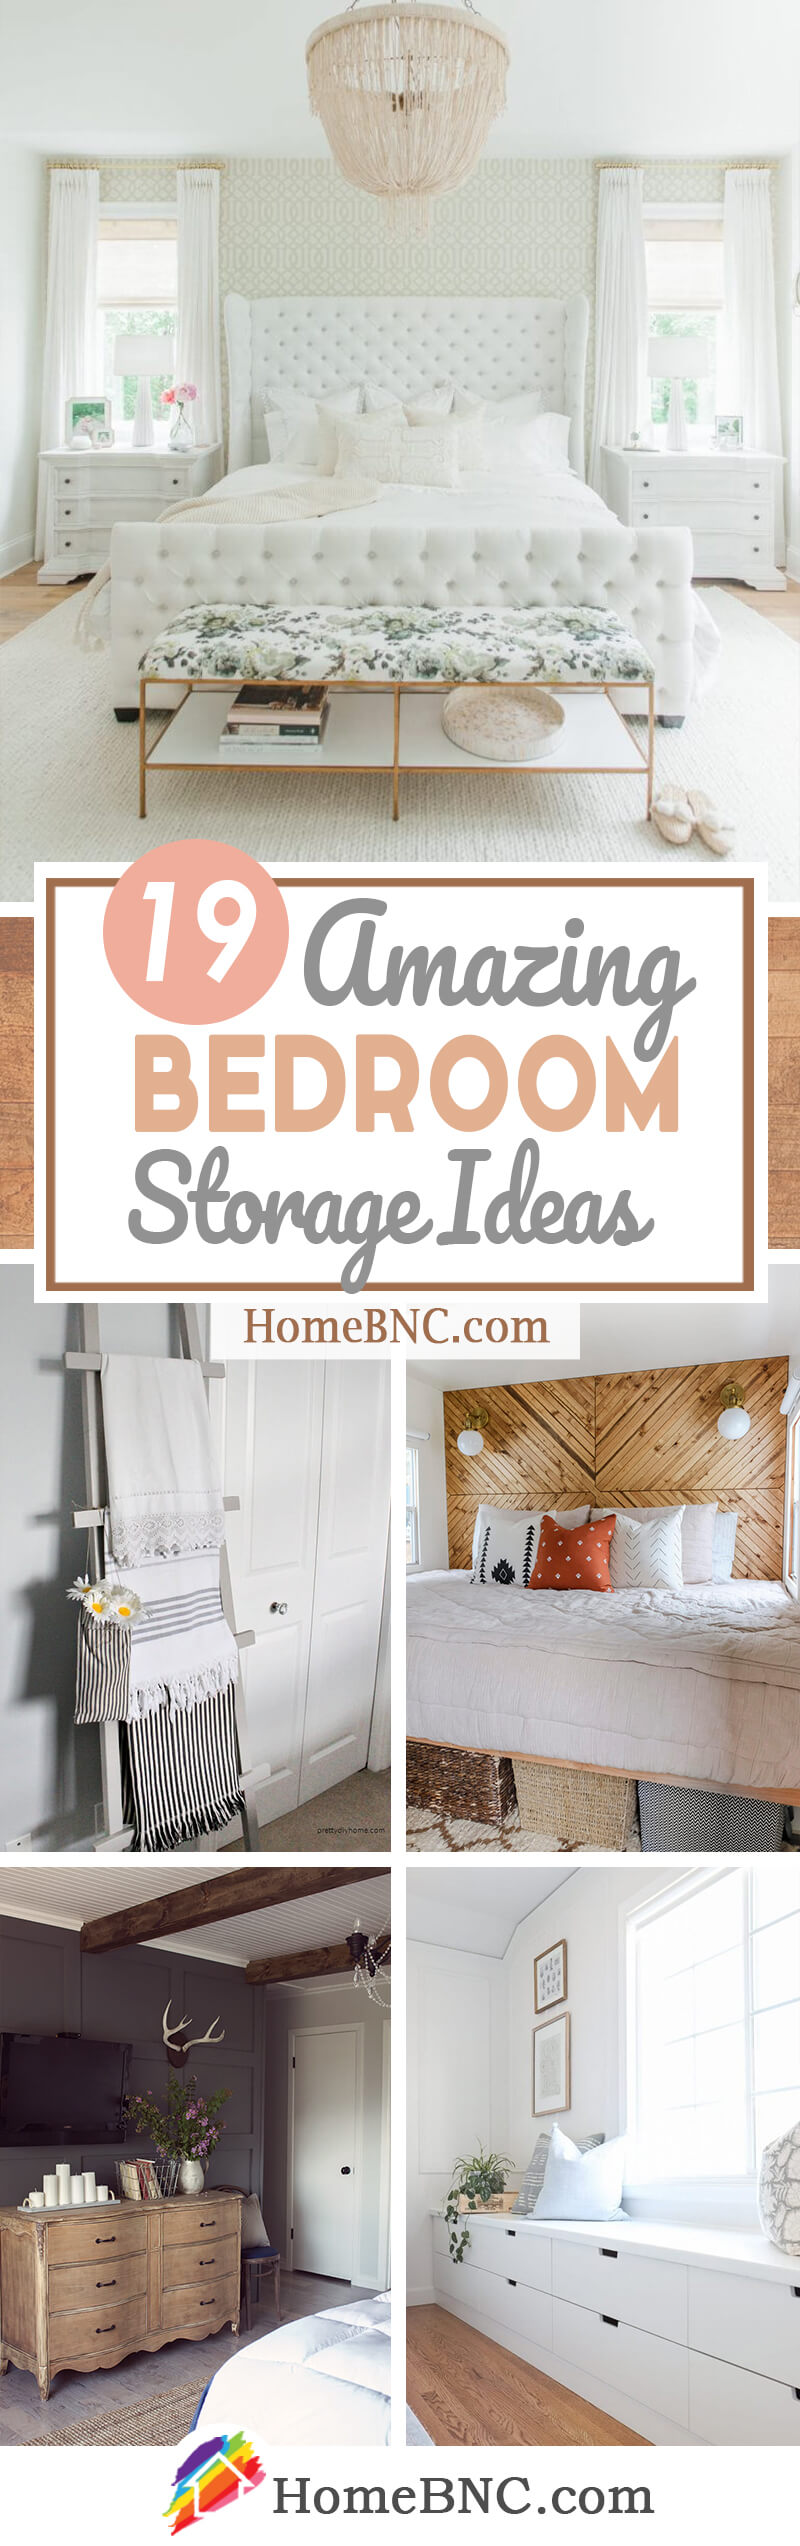 20 Best Bedroom Storage Ideas for Small Spaces in 20